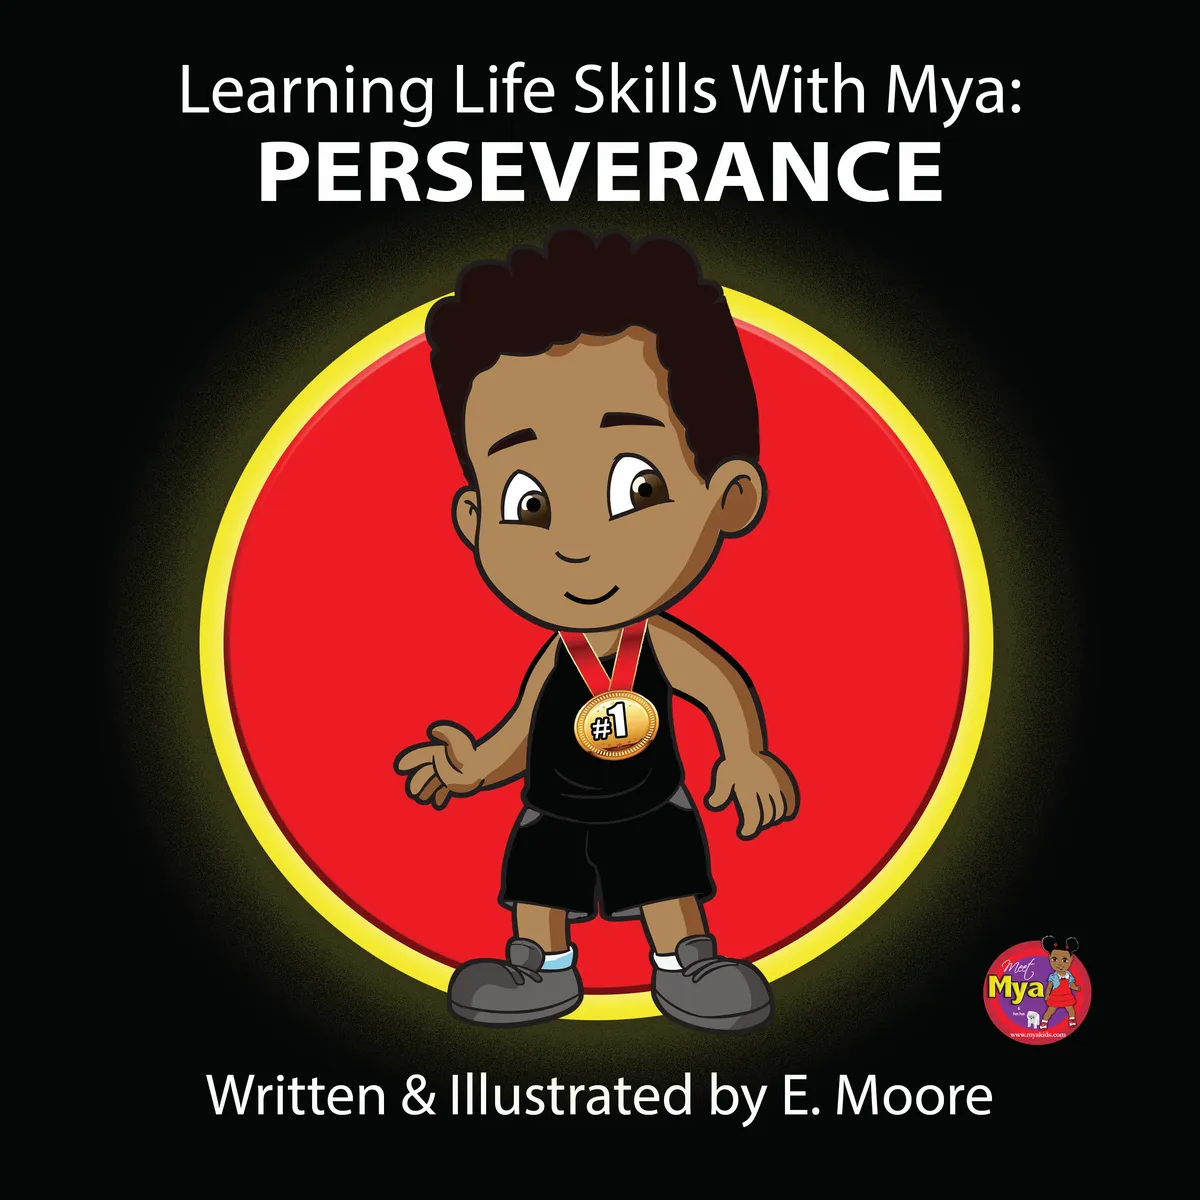 Learning Life Skills With MYA: PERSEVERANCE